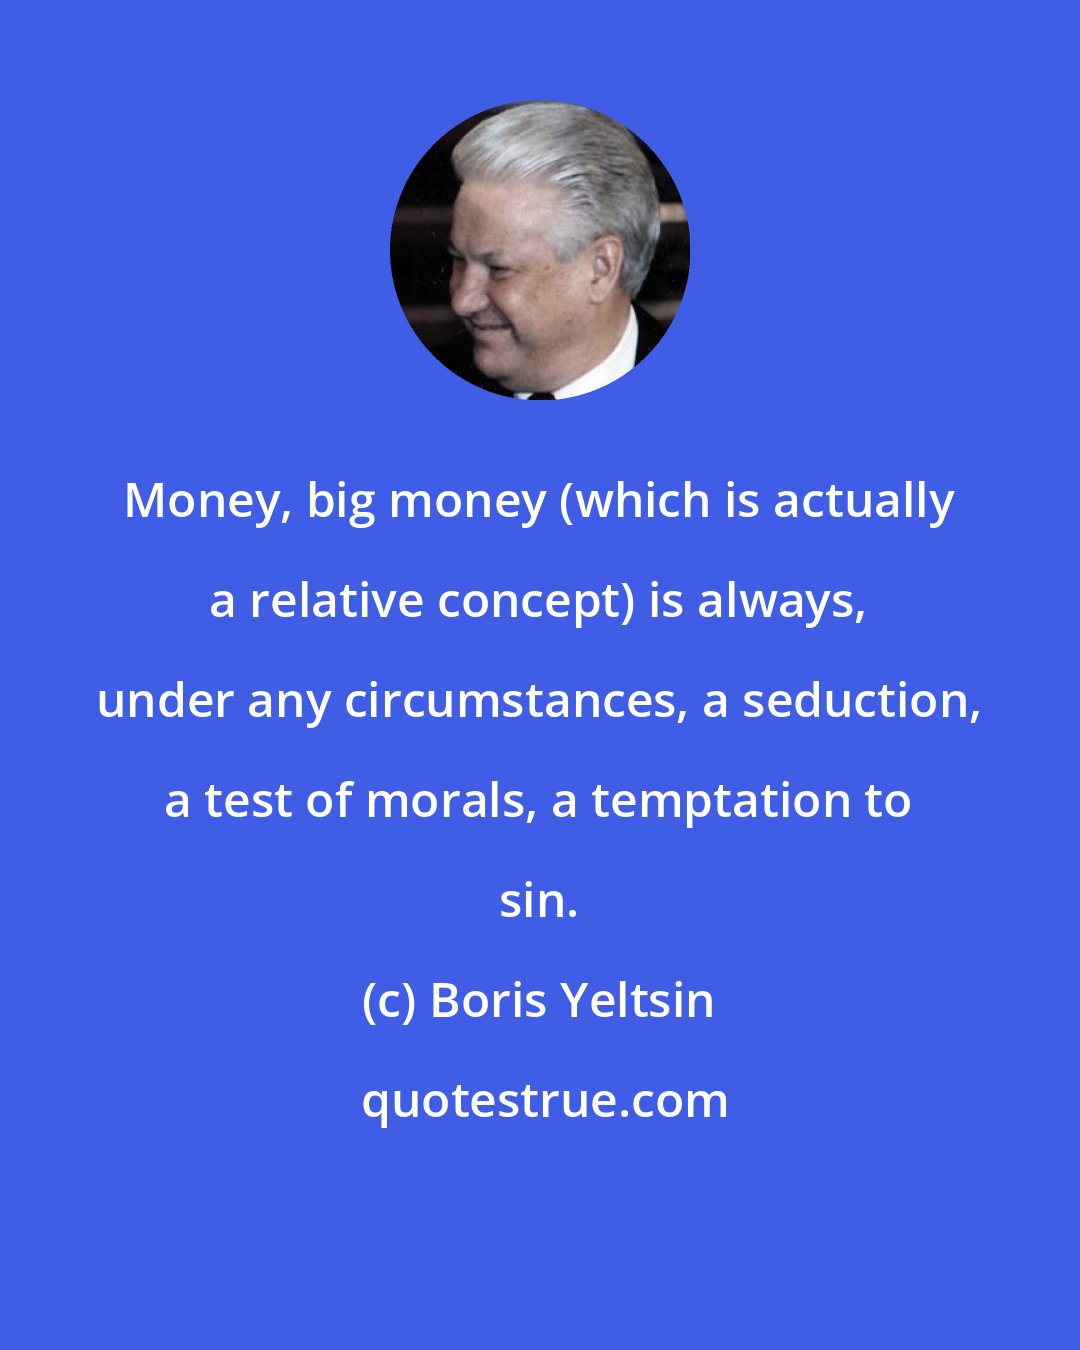 Boris Yeltsin: Money, big money (which is actually a relative concept) is always, under any circumstances, a seduction, a test of morals, a temptation to sin.